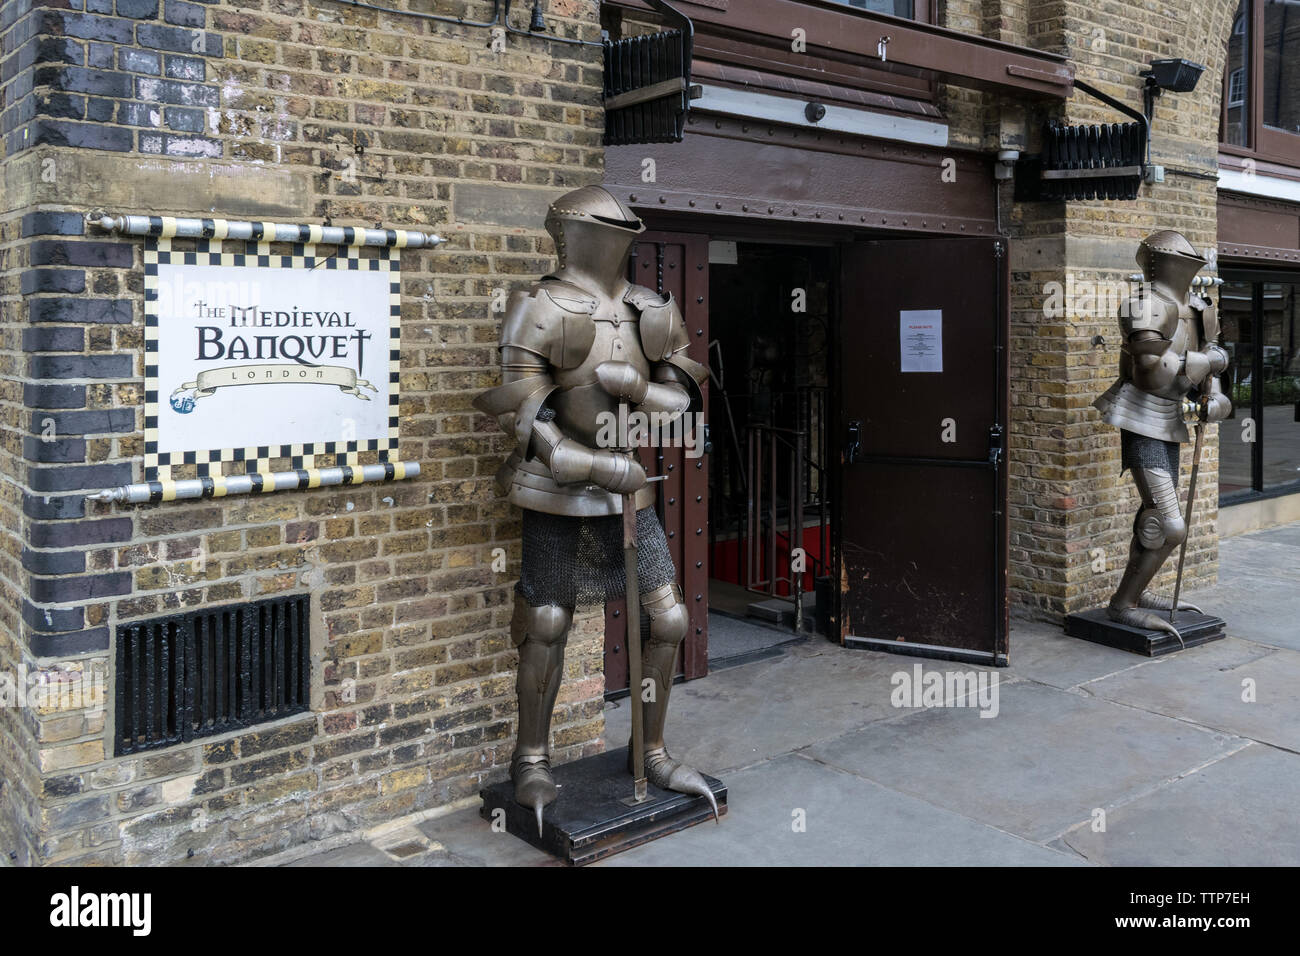 St Katharine's & Wapping london, UK - May 28, 2019: The Medieval Banquet London themed restaurant Stock Photo